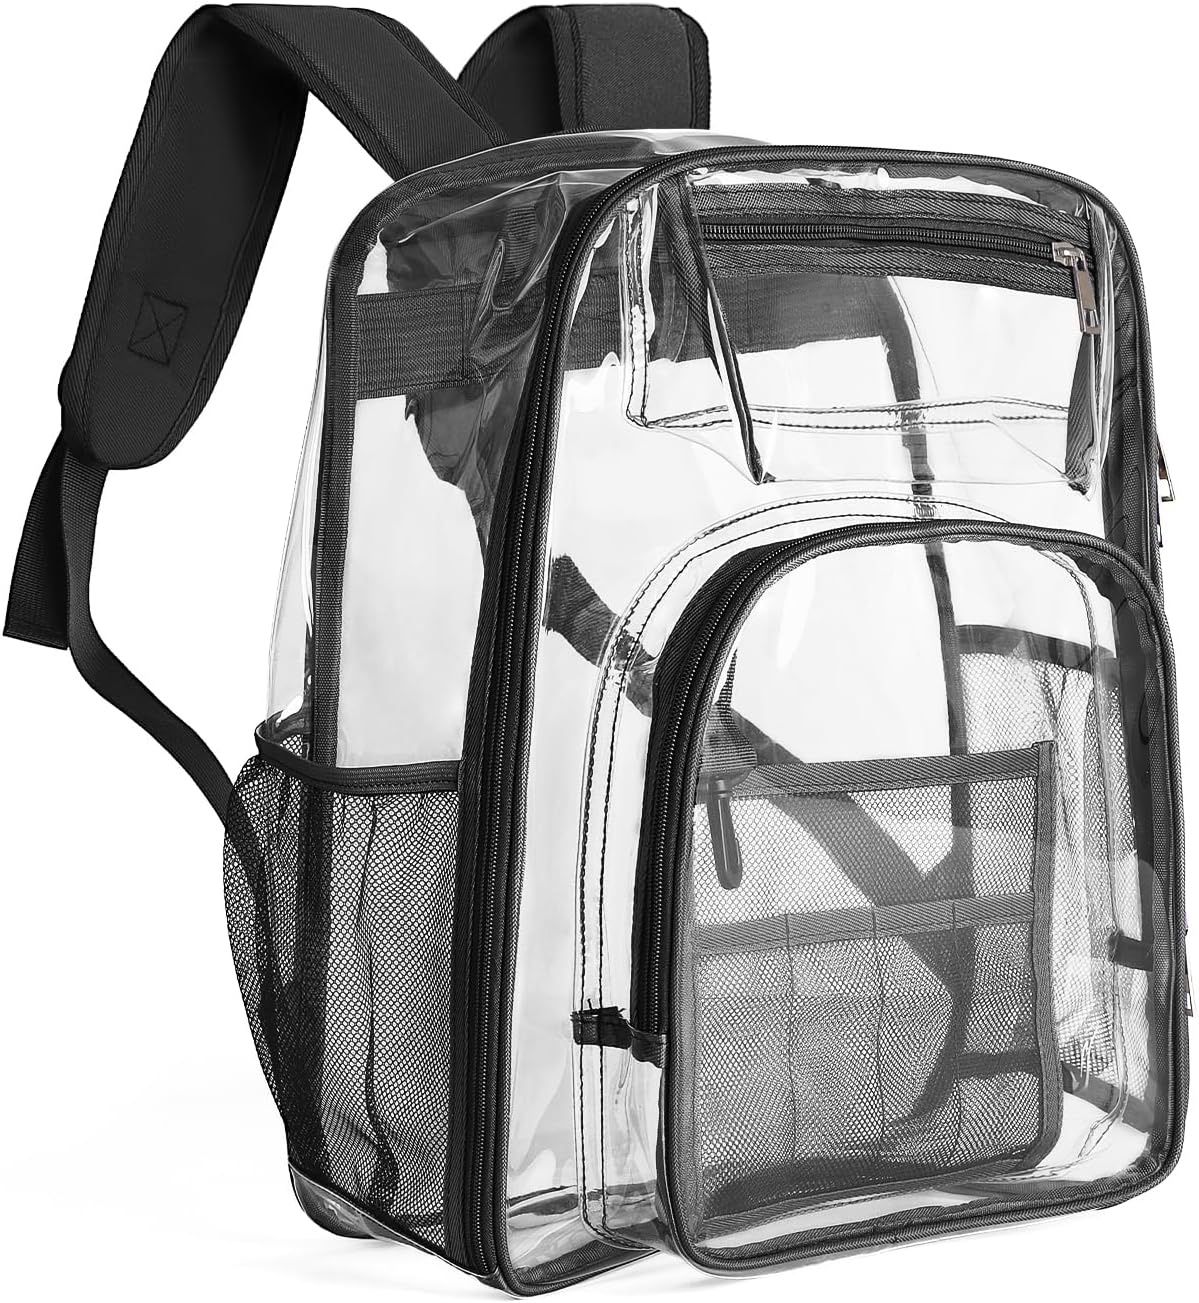 Clear Backpack-Transparent Bookbag With Reinforced Strap & Heavy Duty PVC Multi-Pockets College Workplace, Black